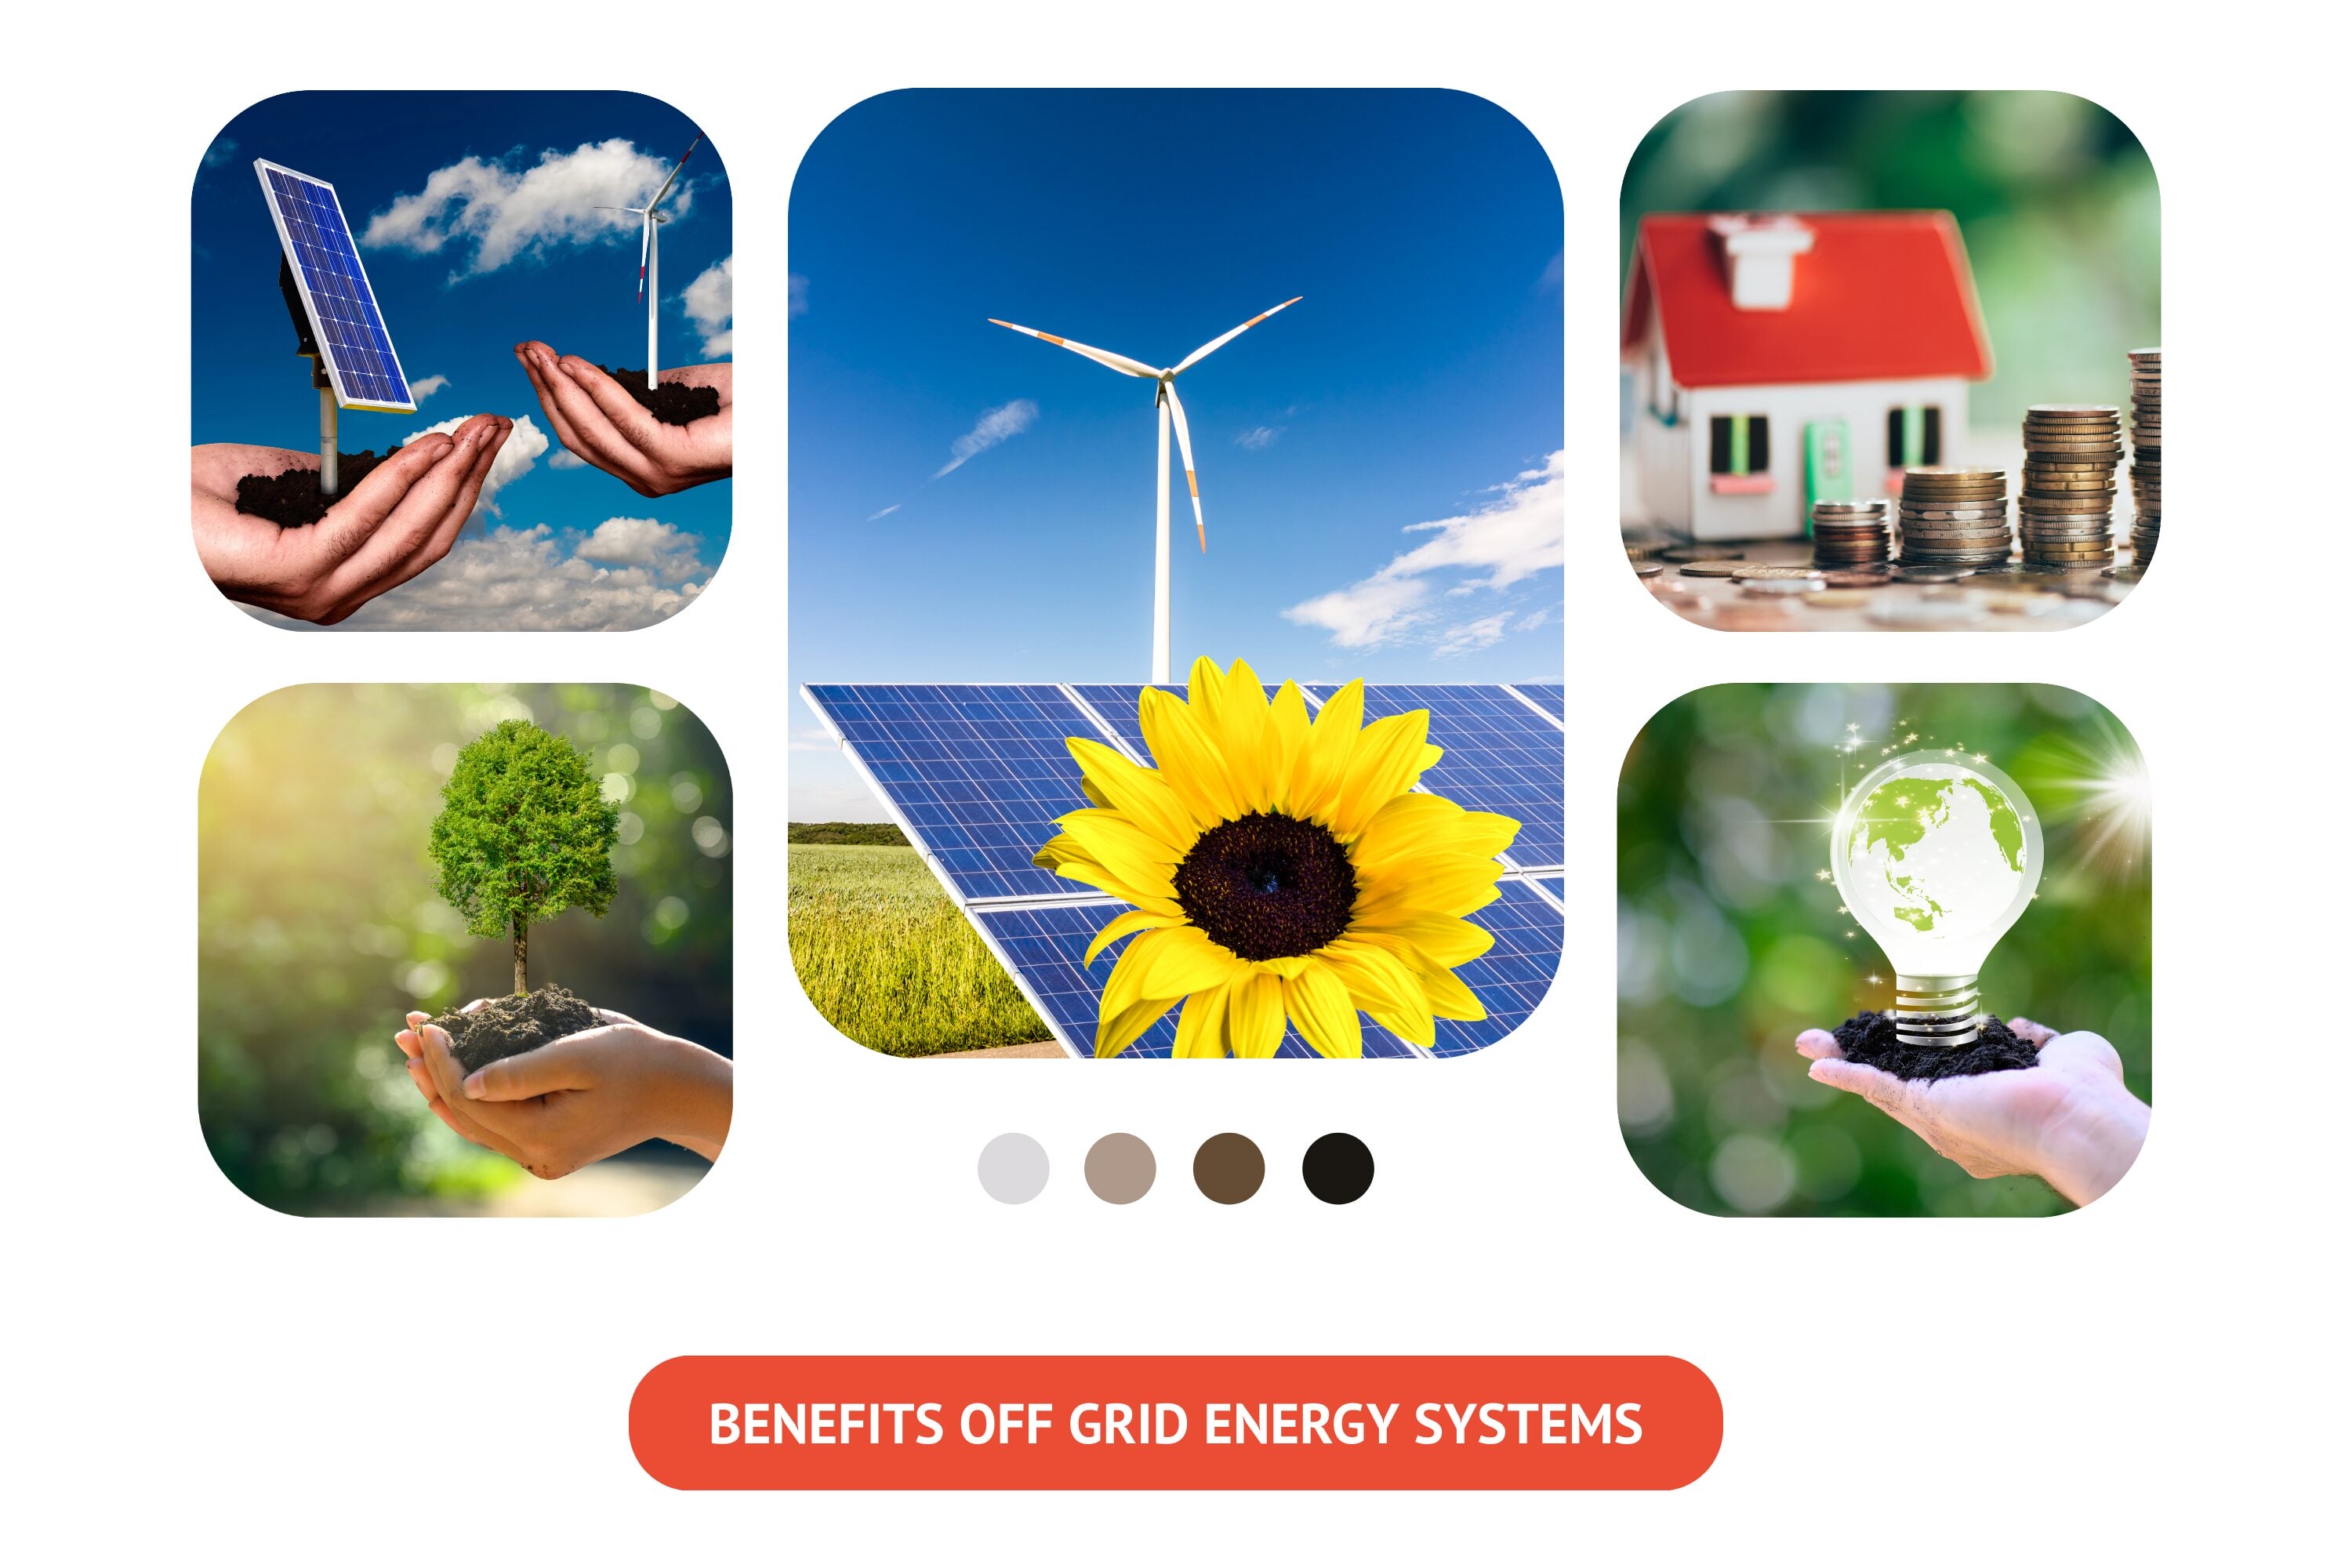 Advantages of off-grid energy systems